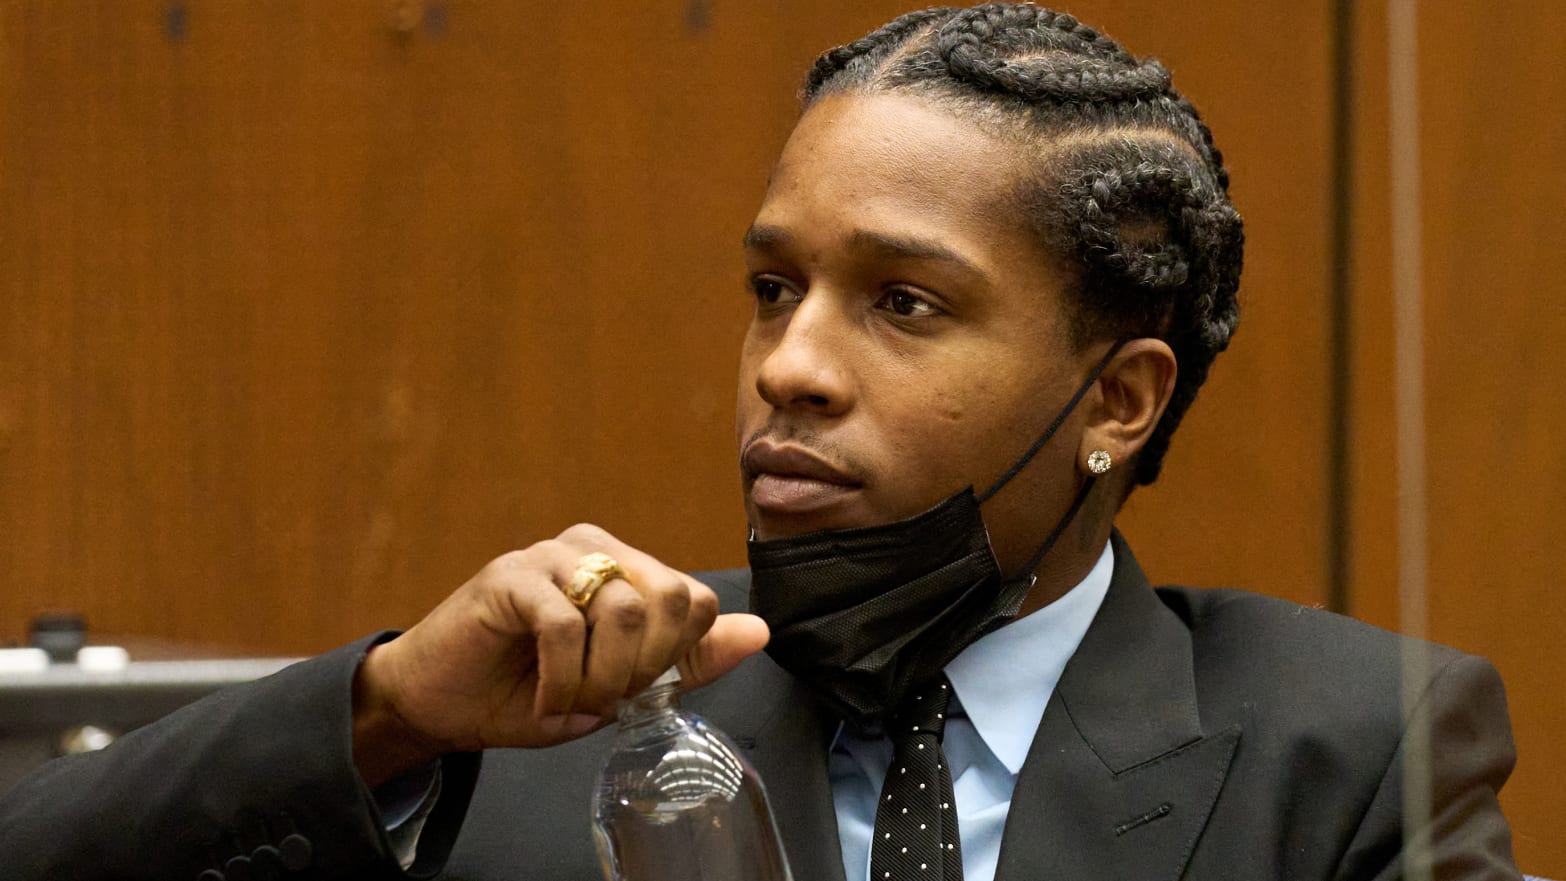 A$AP Rocky opens a bottle of water in a Los Angeles courtroom.